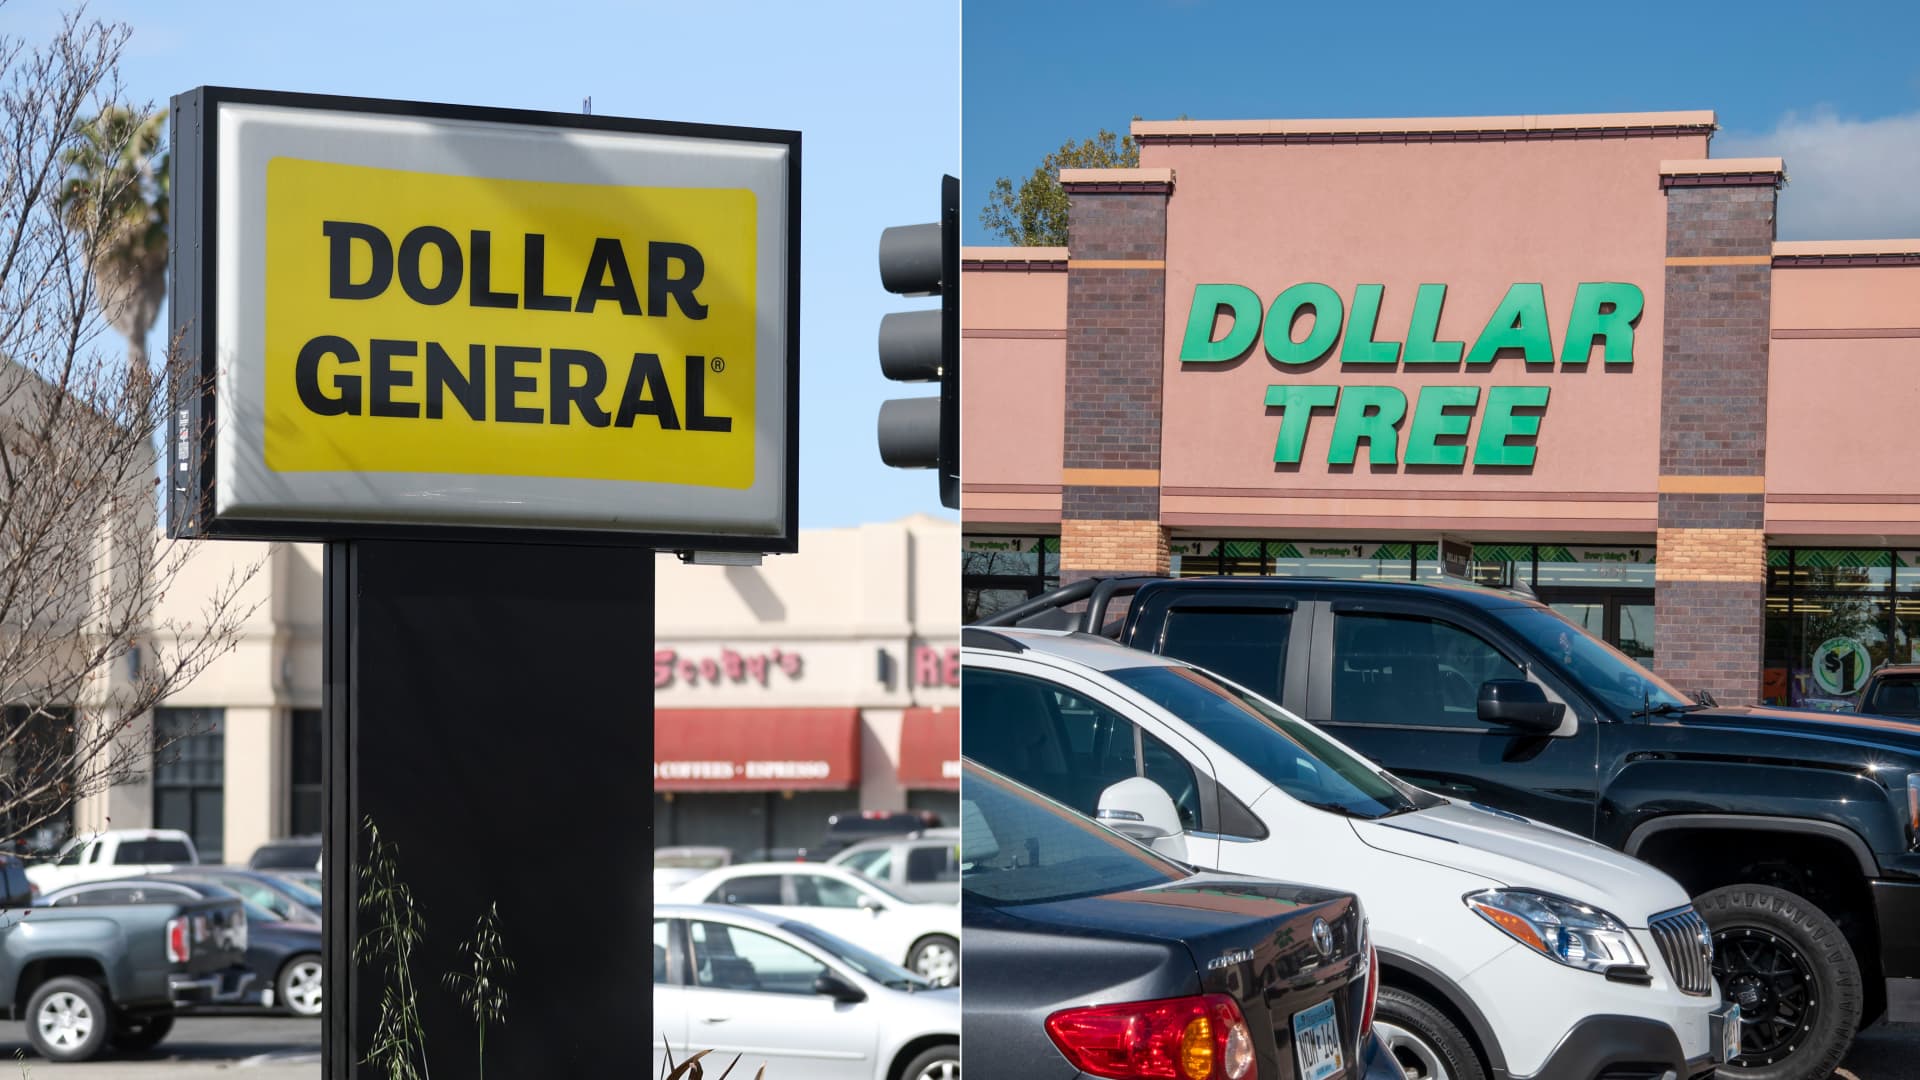 Dollar General and Dollar Tree stores